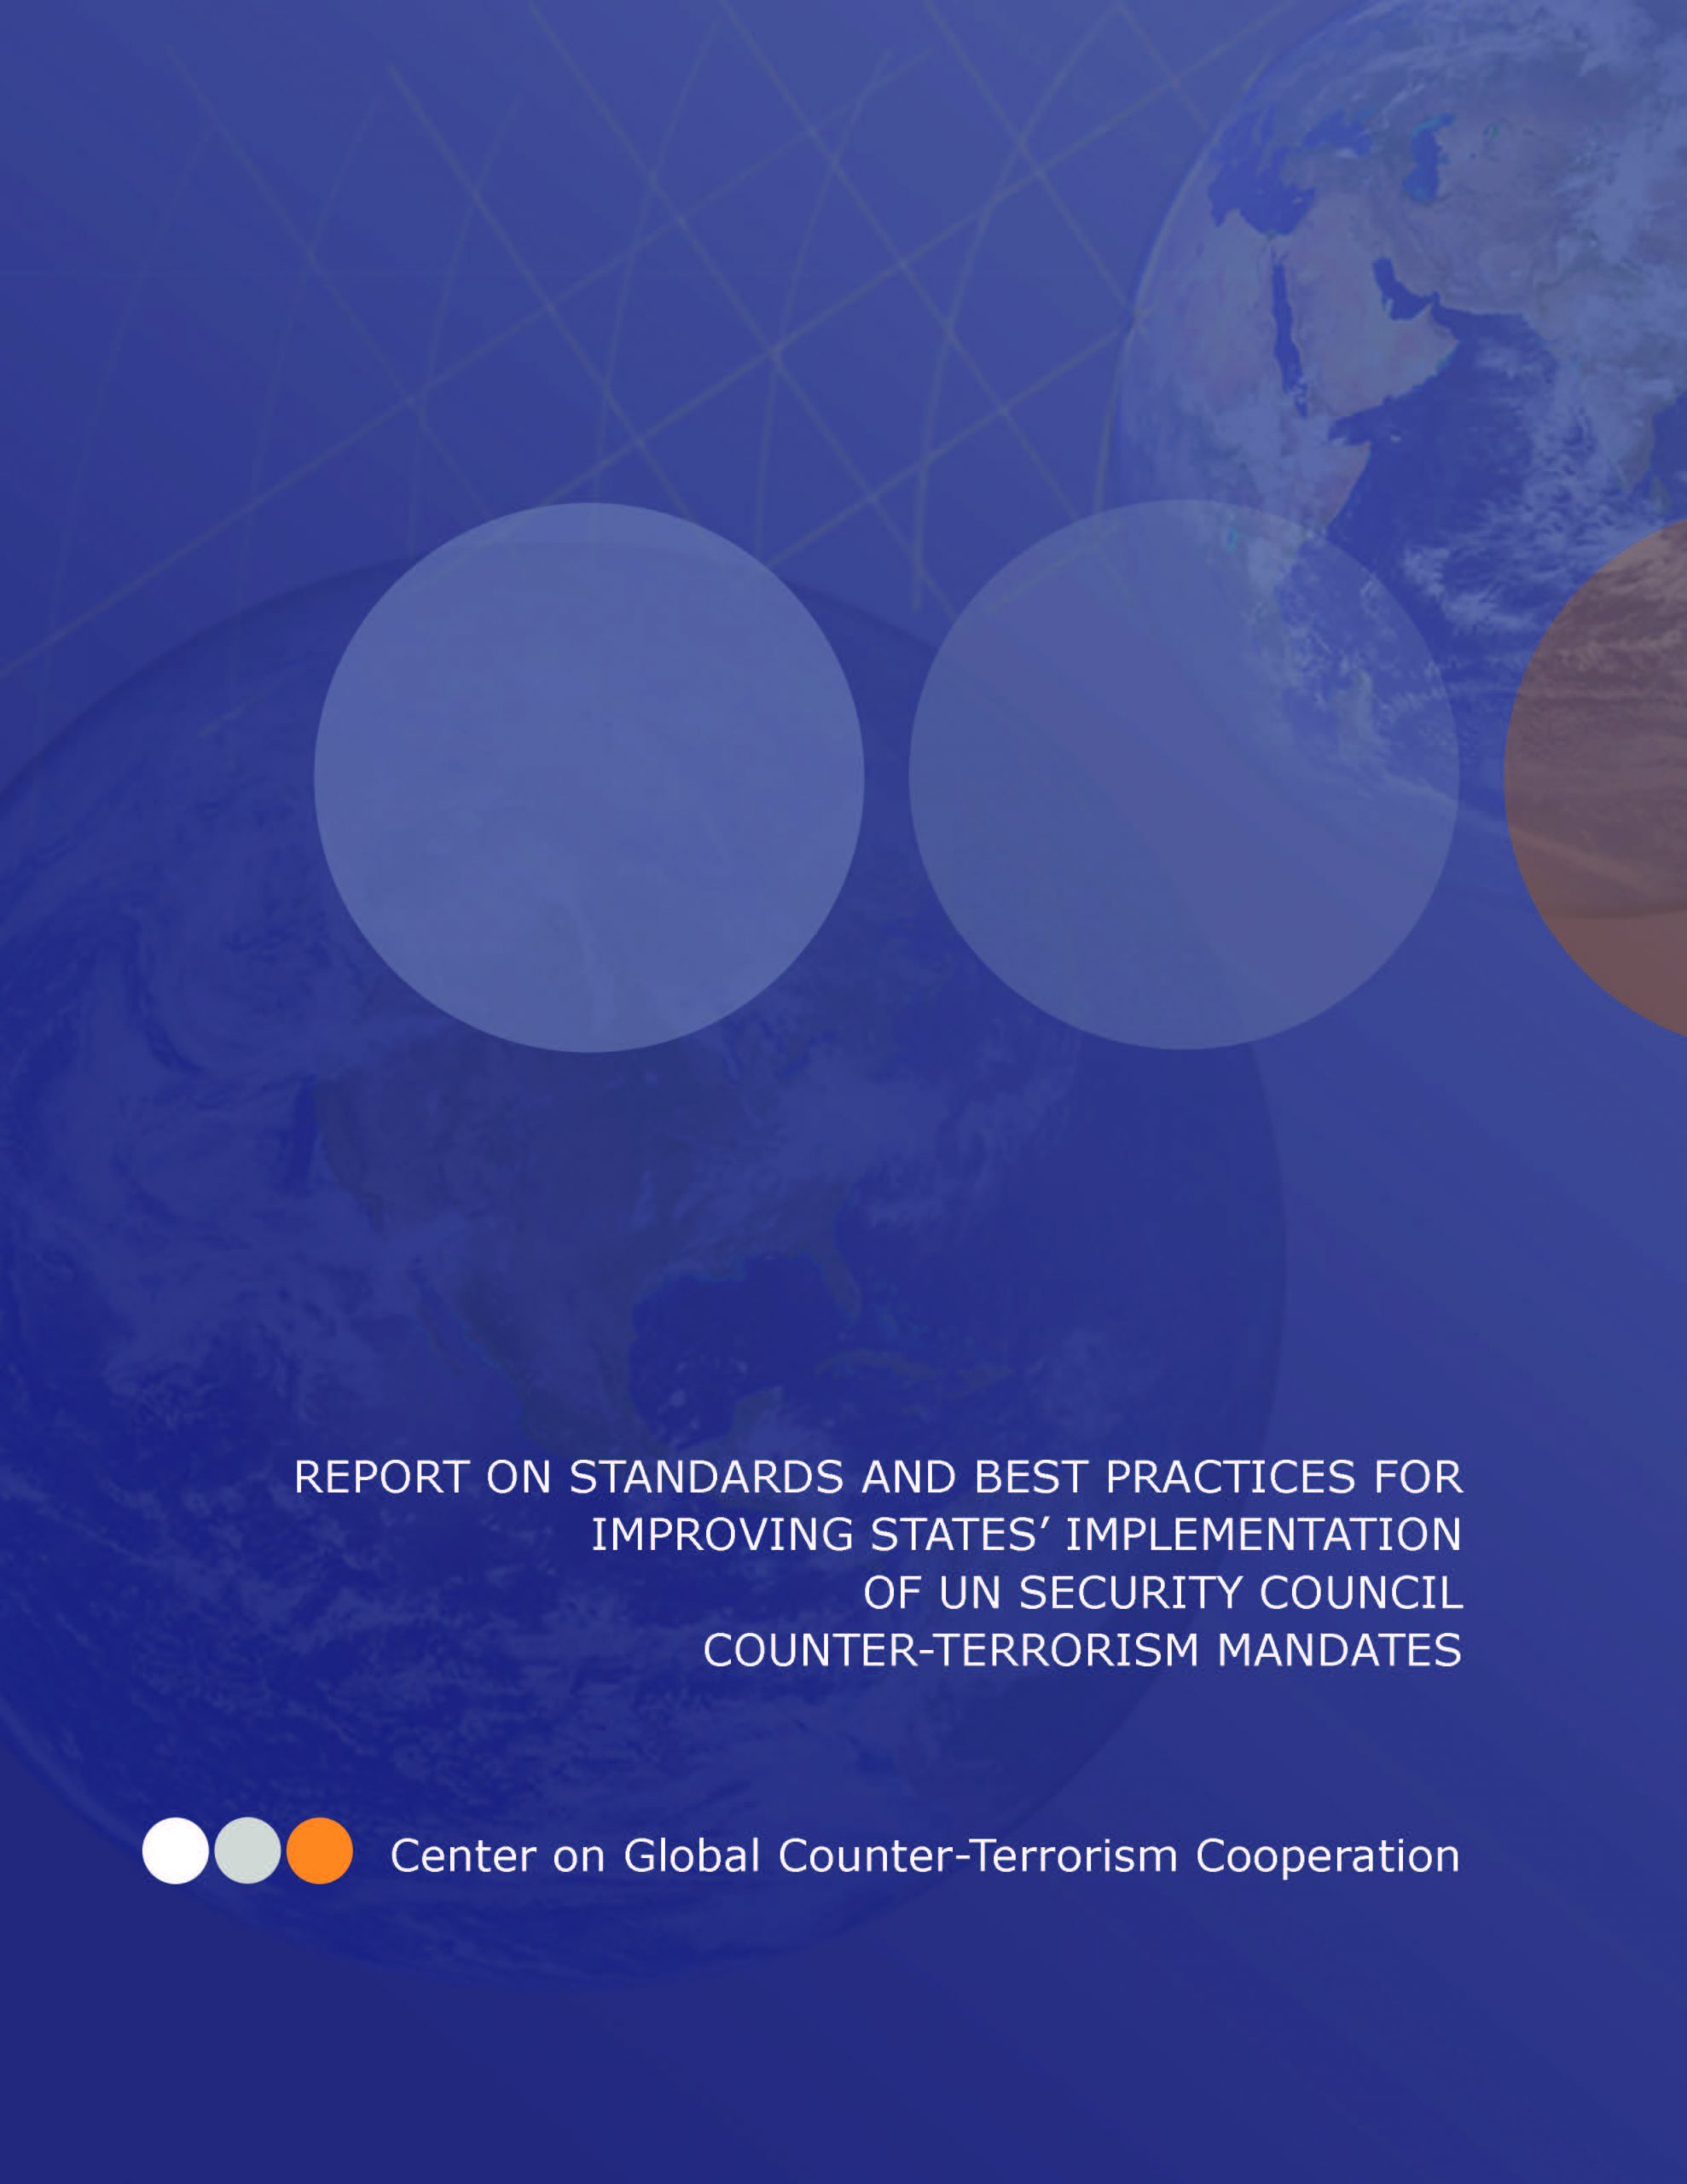 Report on Standards and Best Practices for Improving States’ Implementation of UN Security Council Counter-Terrorism Mandates